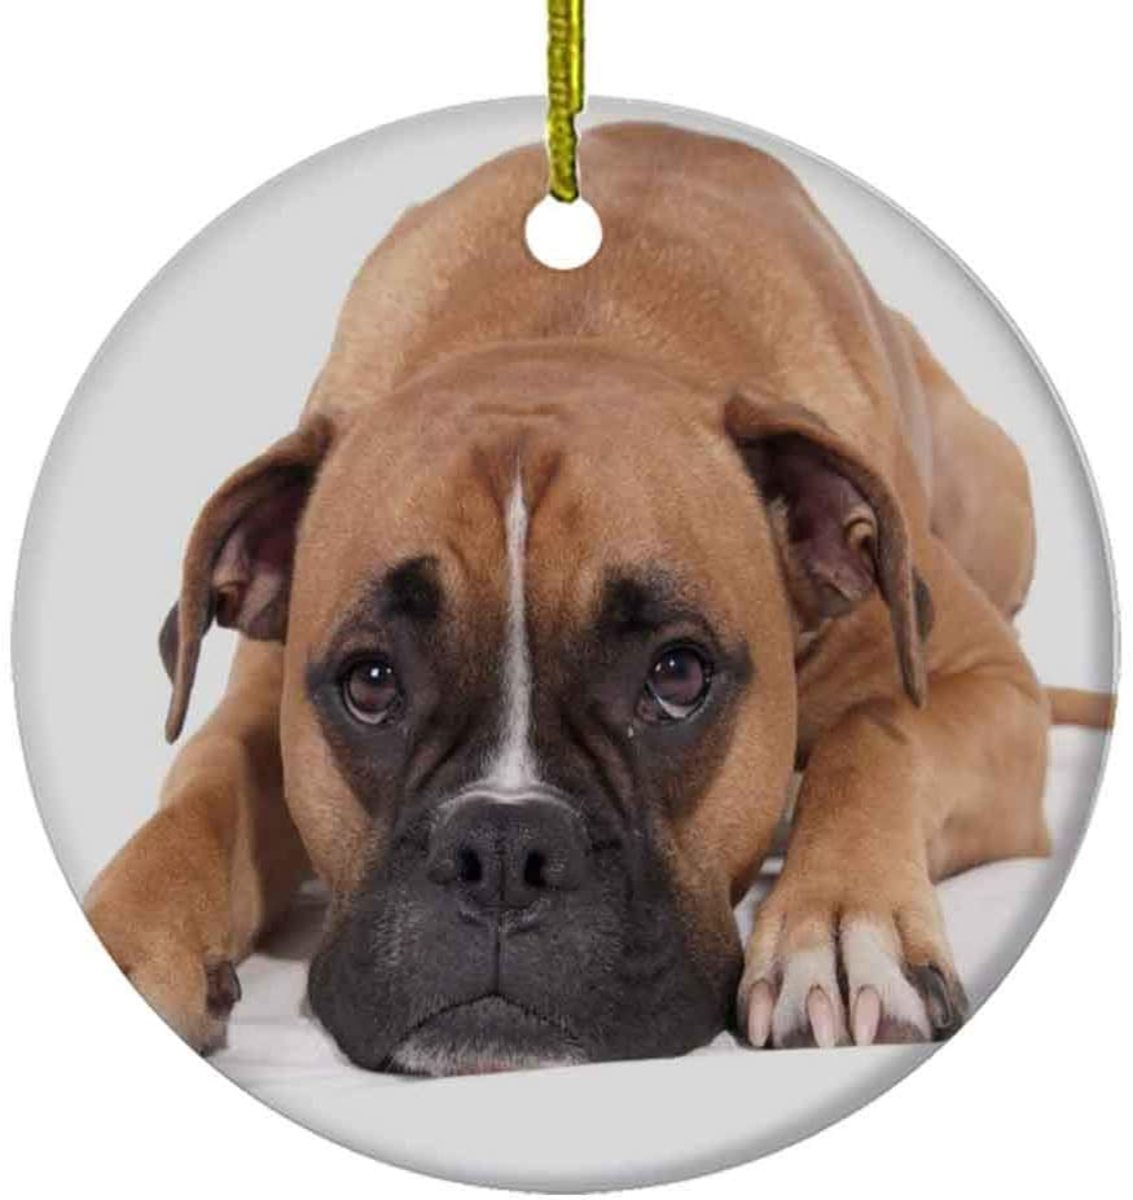 Box Dog ornament for your Christmas tree, or for mine!